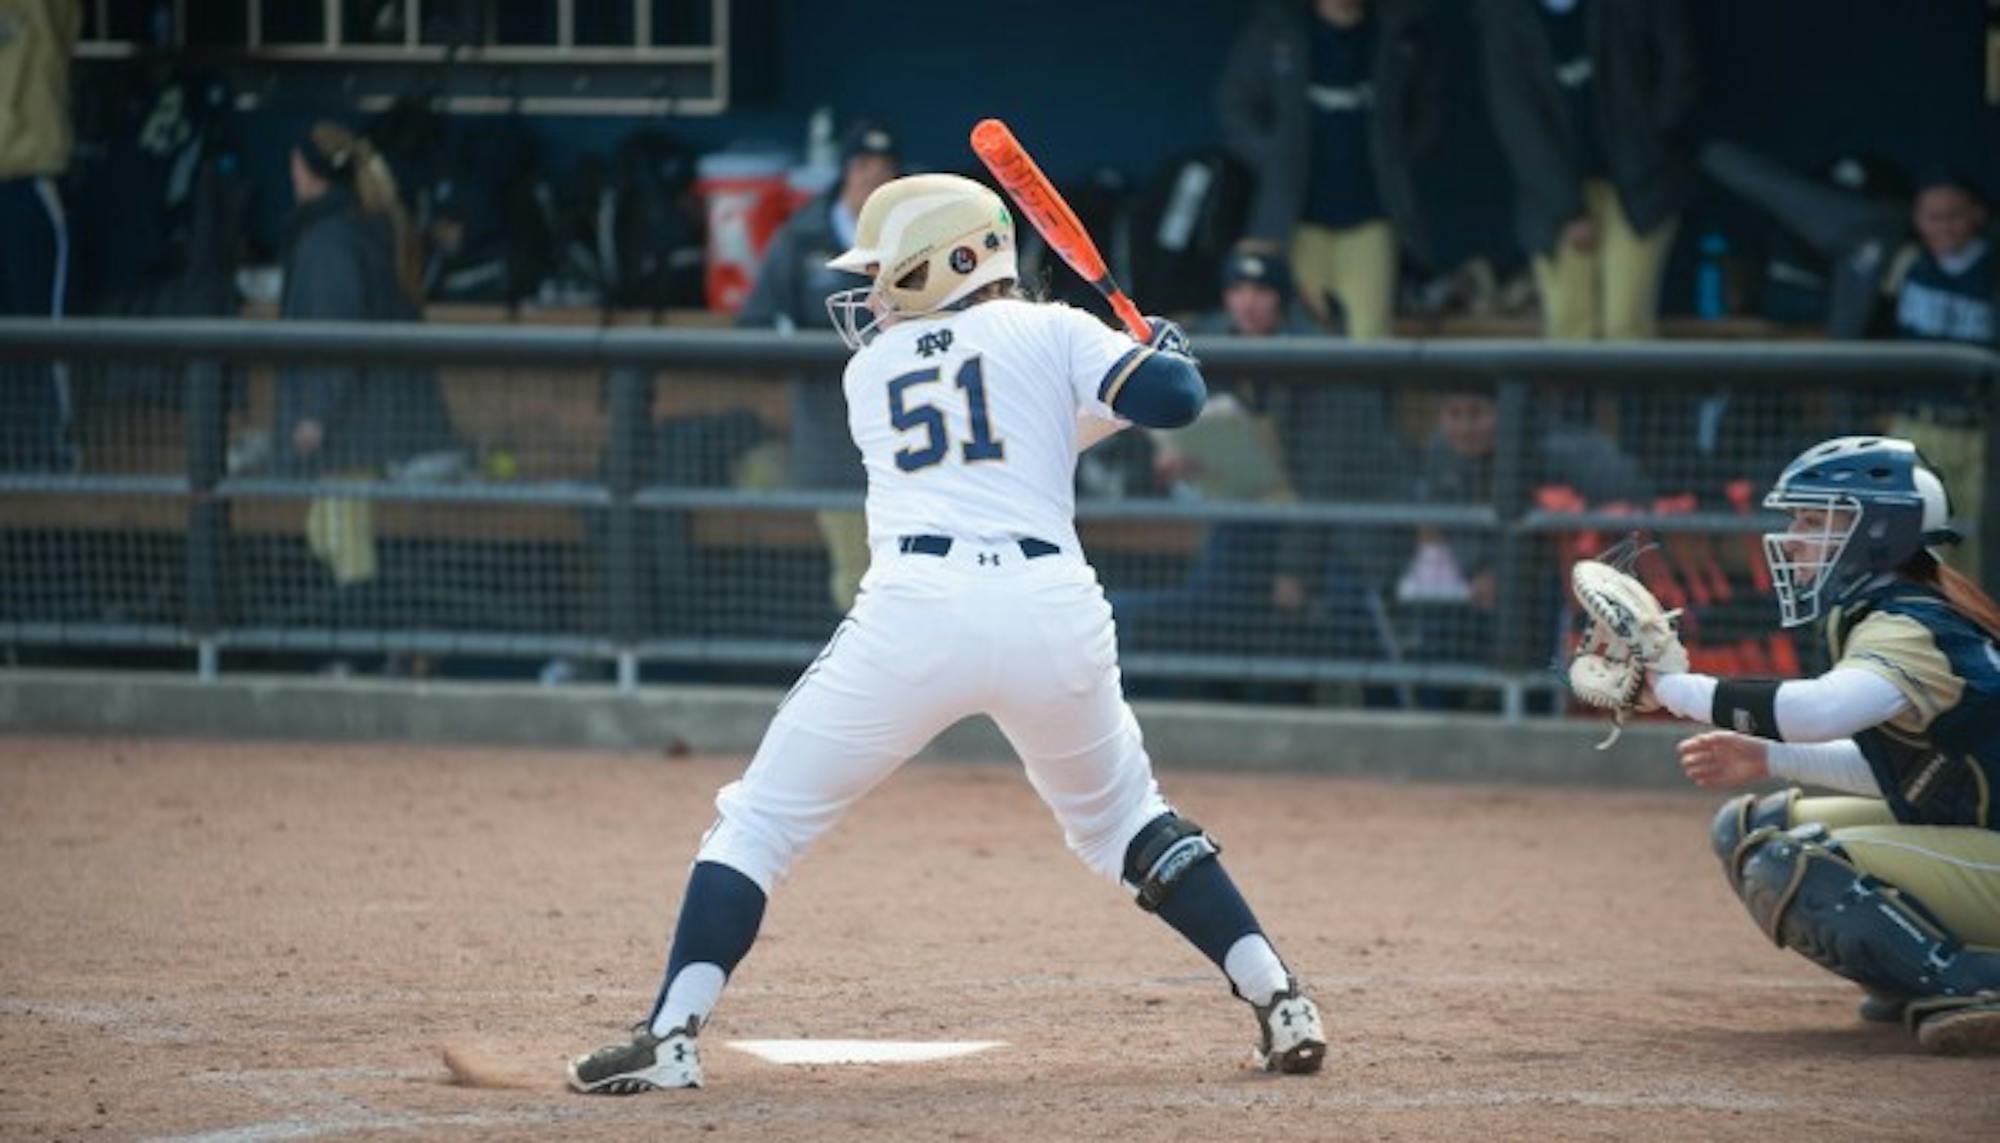 Senior catcher Cassidy Whidden eyes a pitch in the 6-1 win against Georgia Tech on March 21.